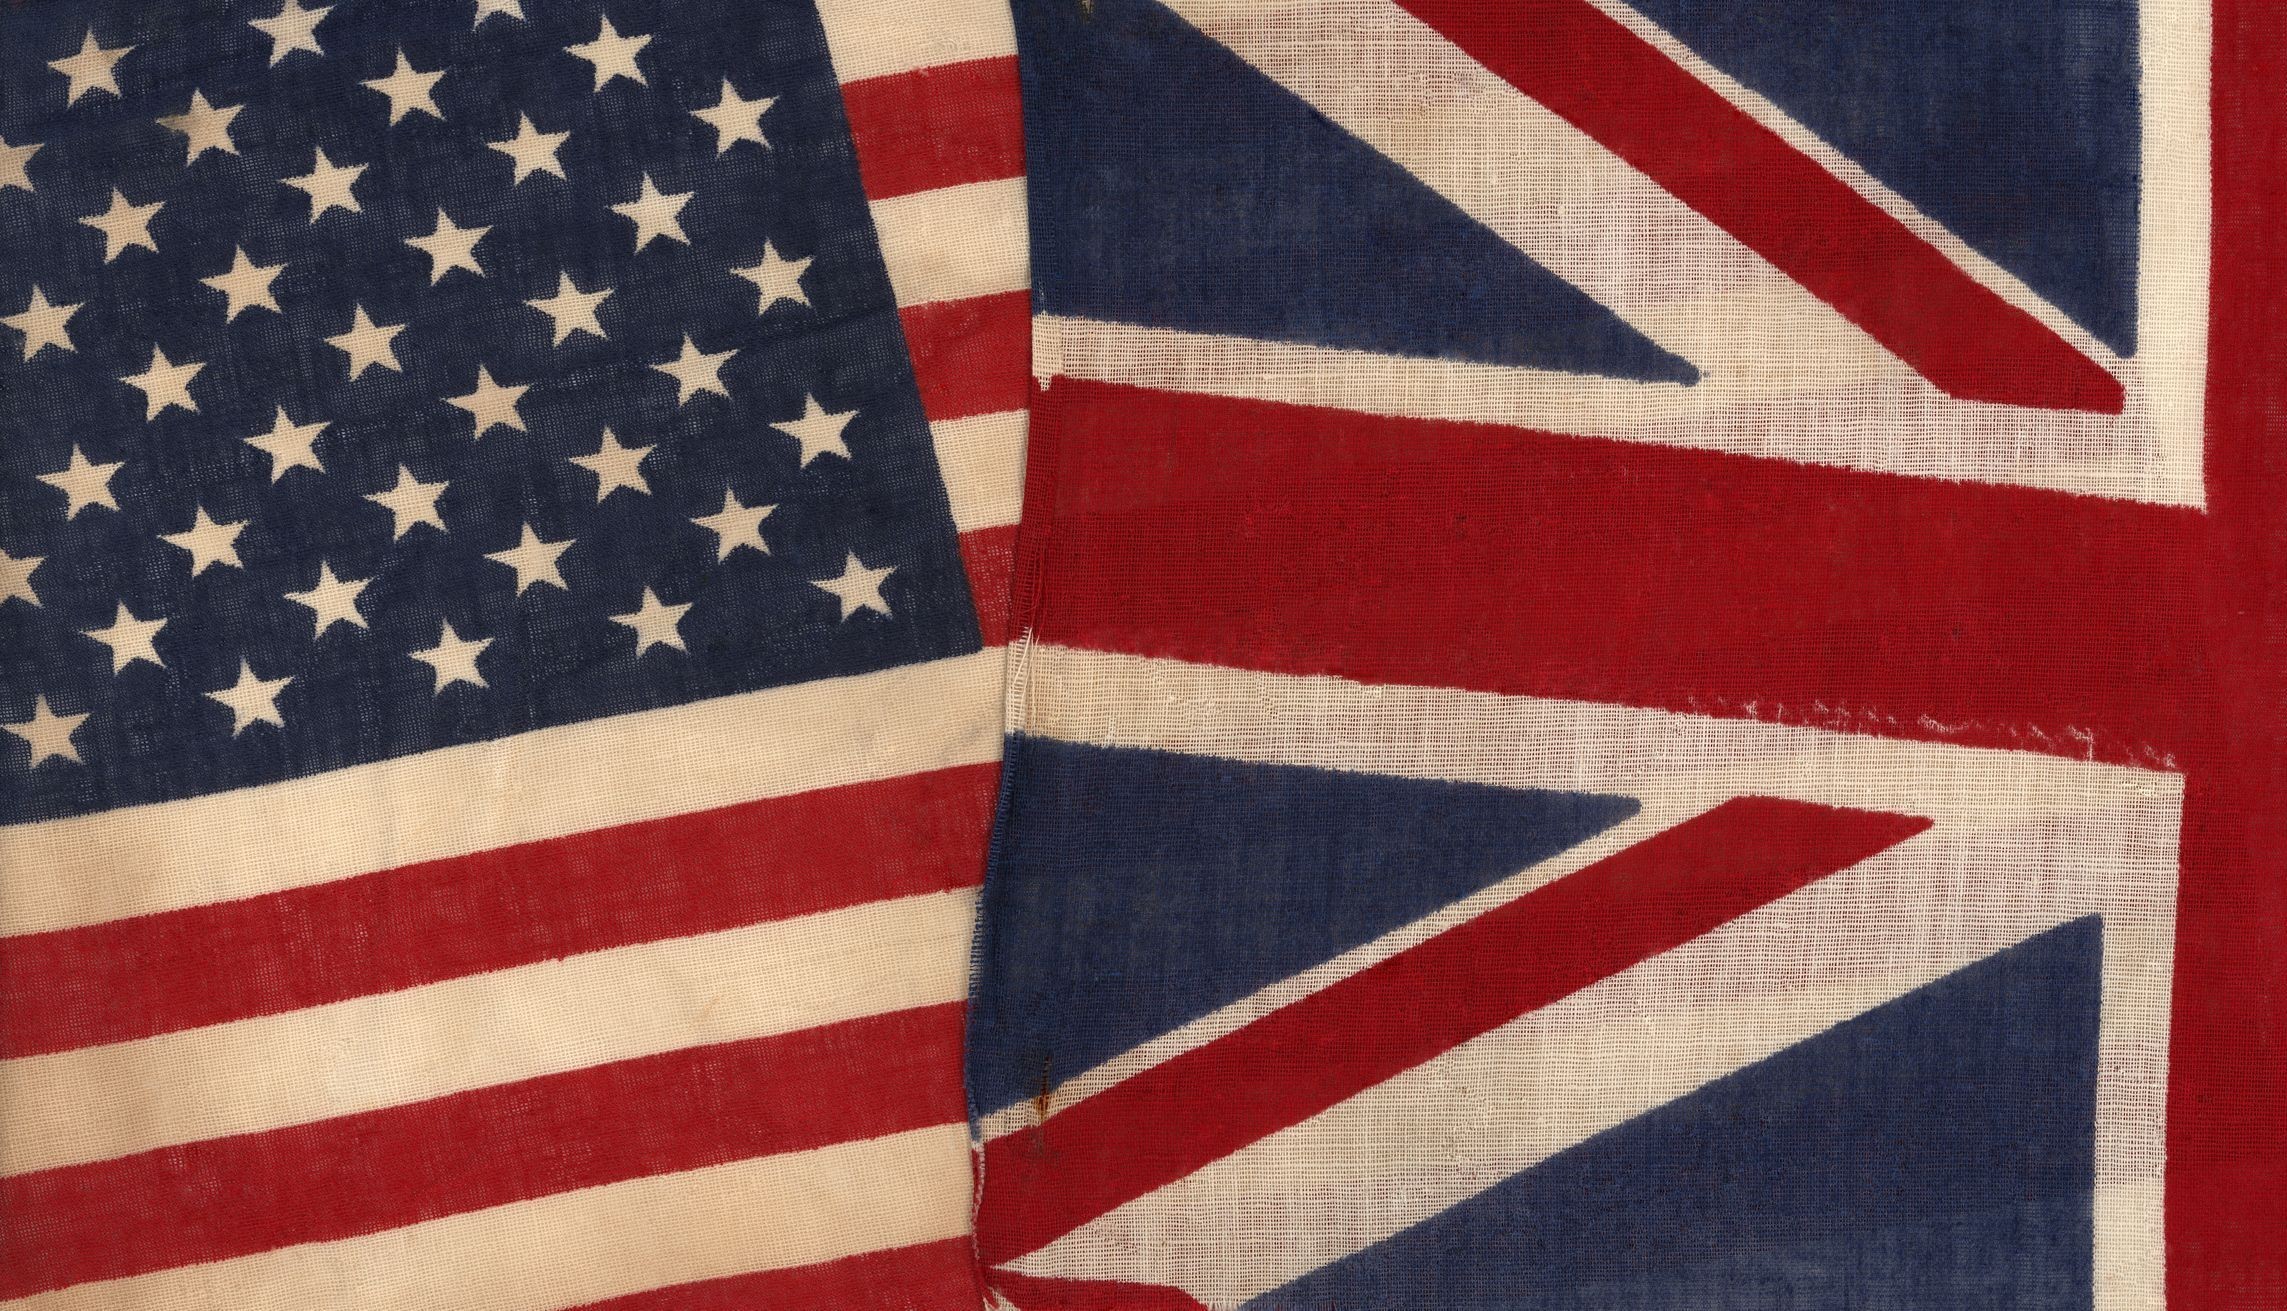 2287x1311 Vintage Us And Union Jack Flags 2287x1311